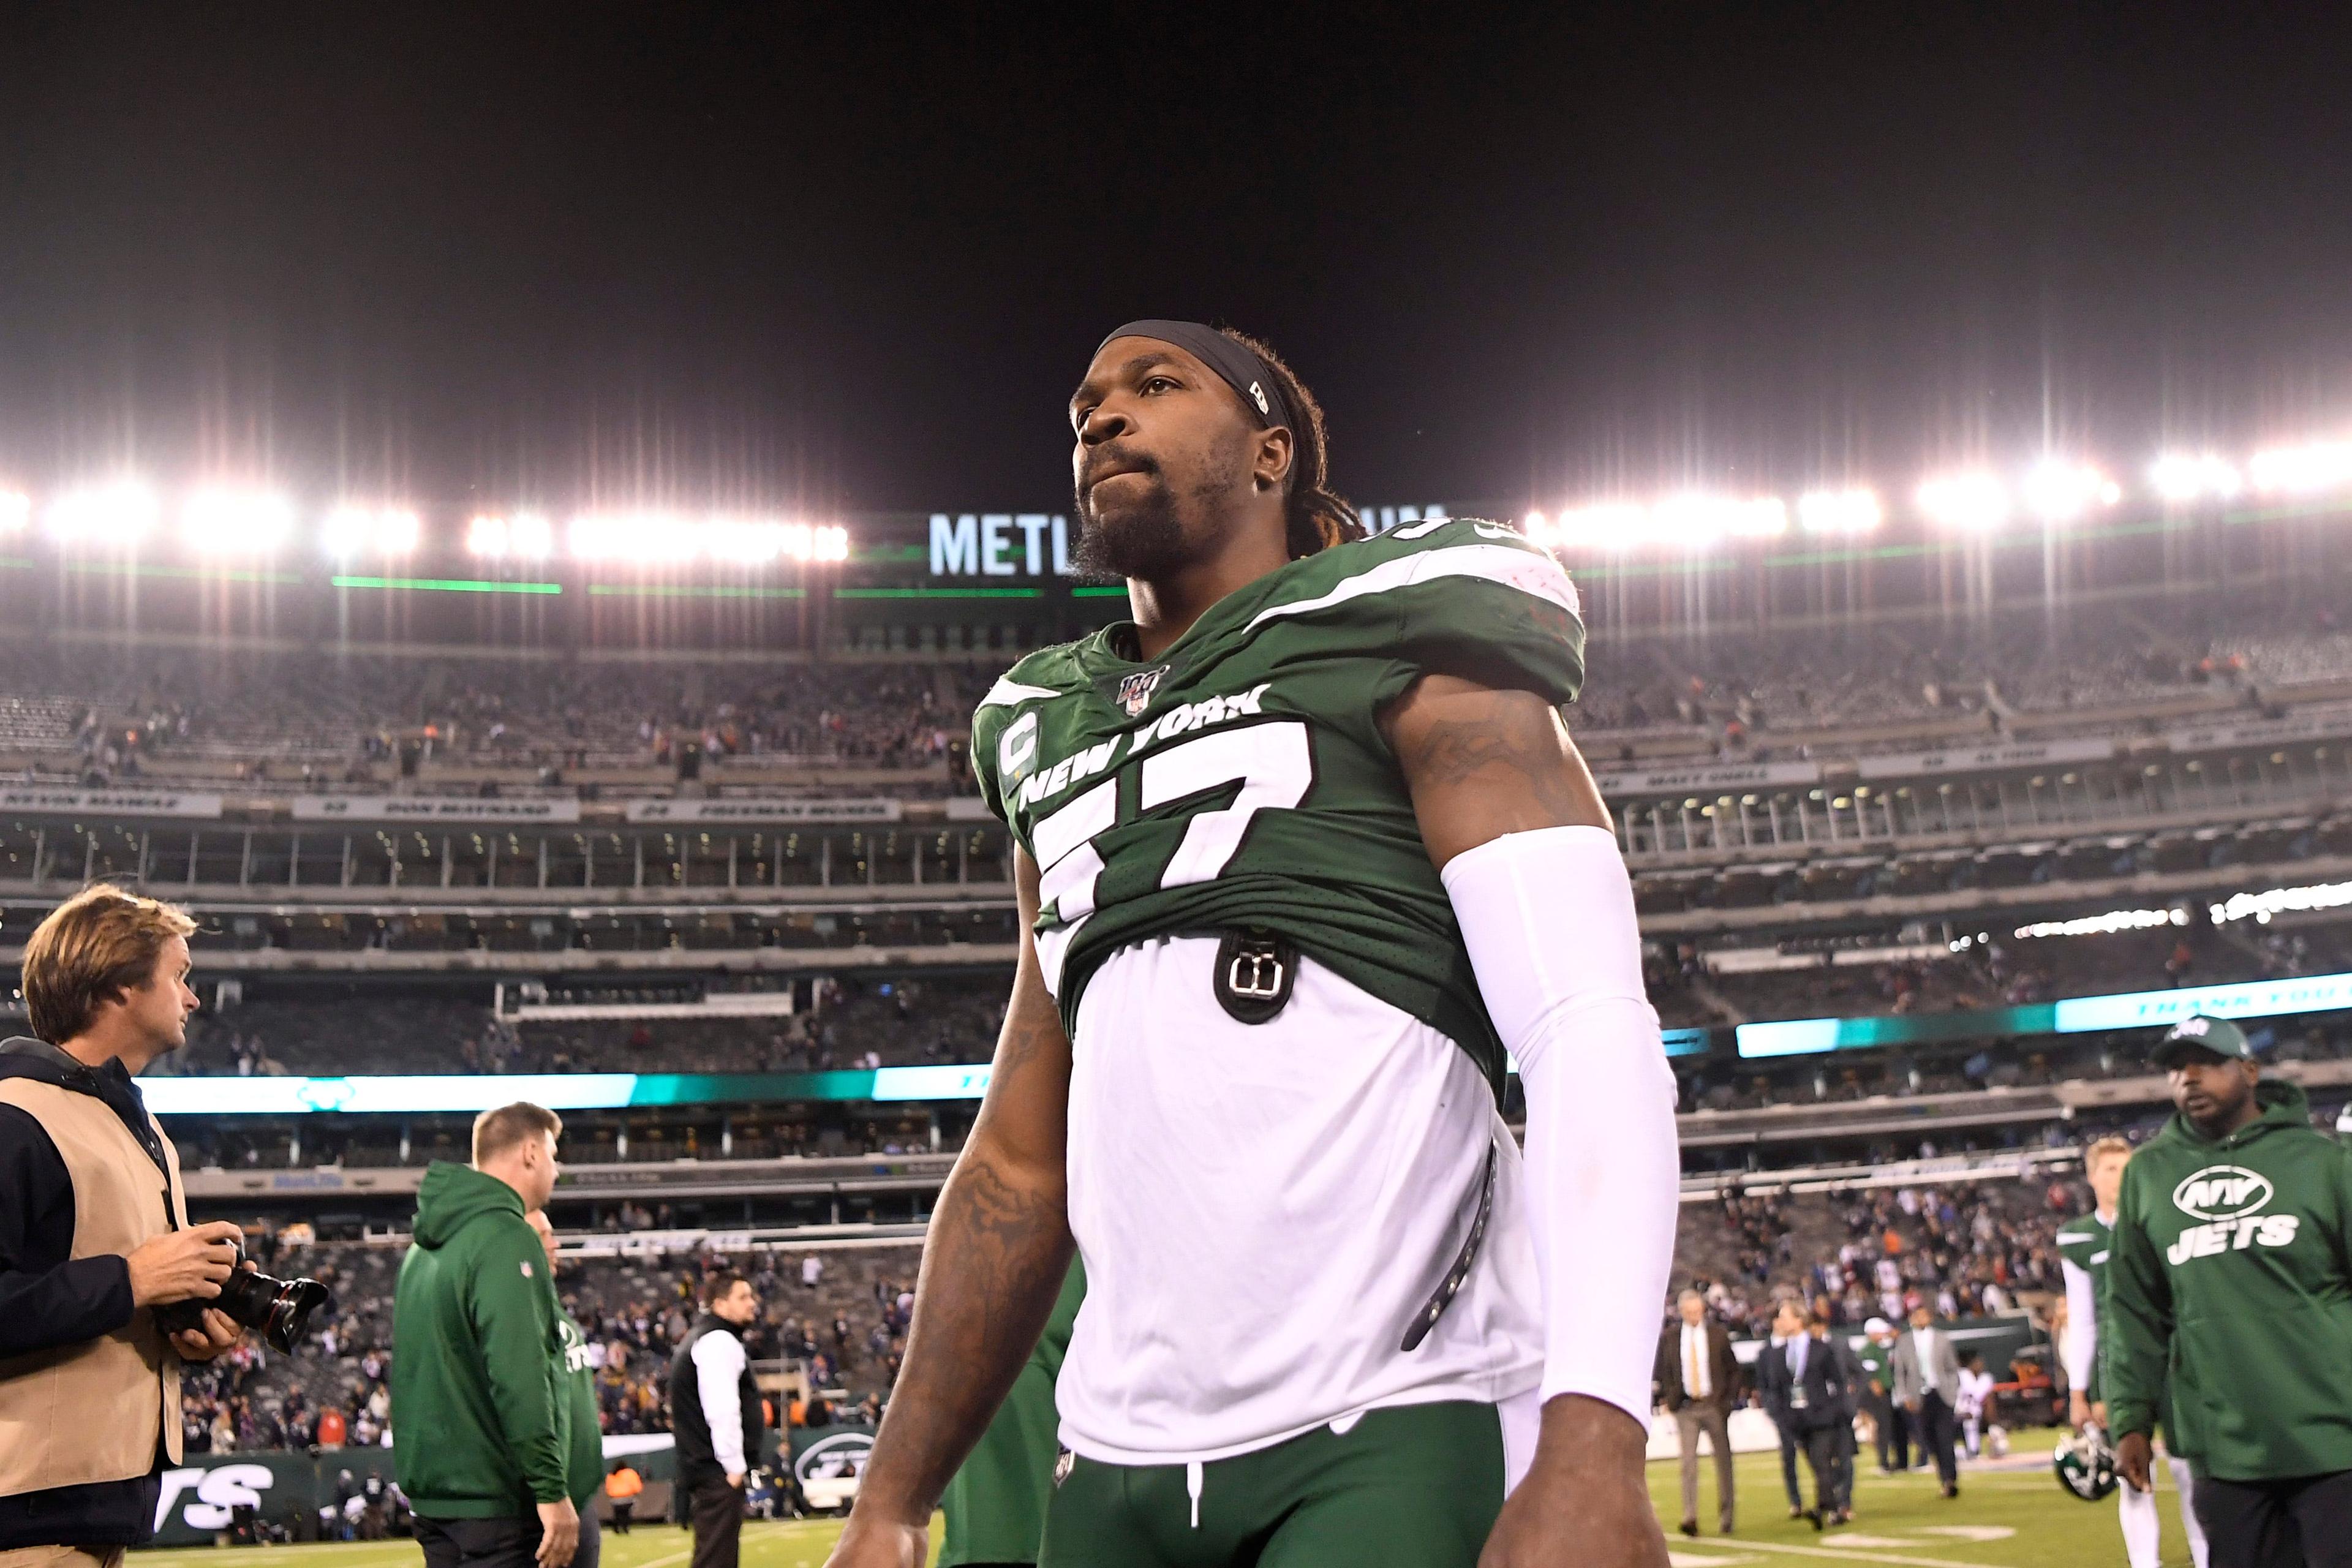 New York Jets linebacker C.J. Mosley (57) walks off the field after a disappointing return. The New England Patriots shut out the New York Jets, 33-0, at MetLife Stadium on Monday, Oct. 21, 2019, / Danielle Parhizkaran/NorthJersey.com-Imagn Content Services, LLC